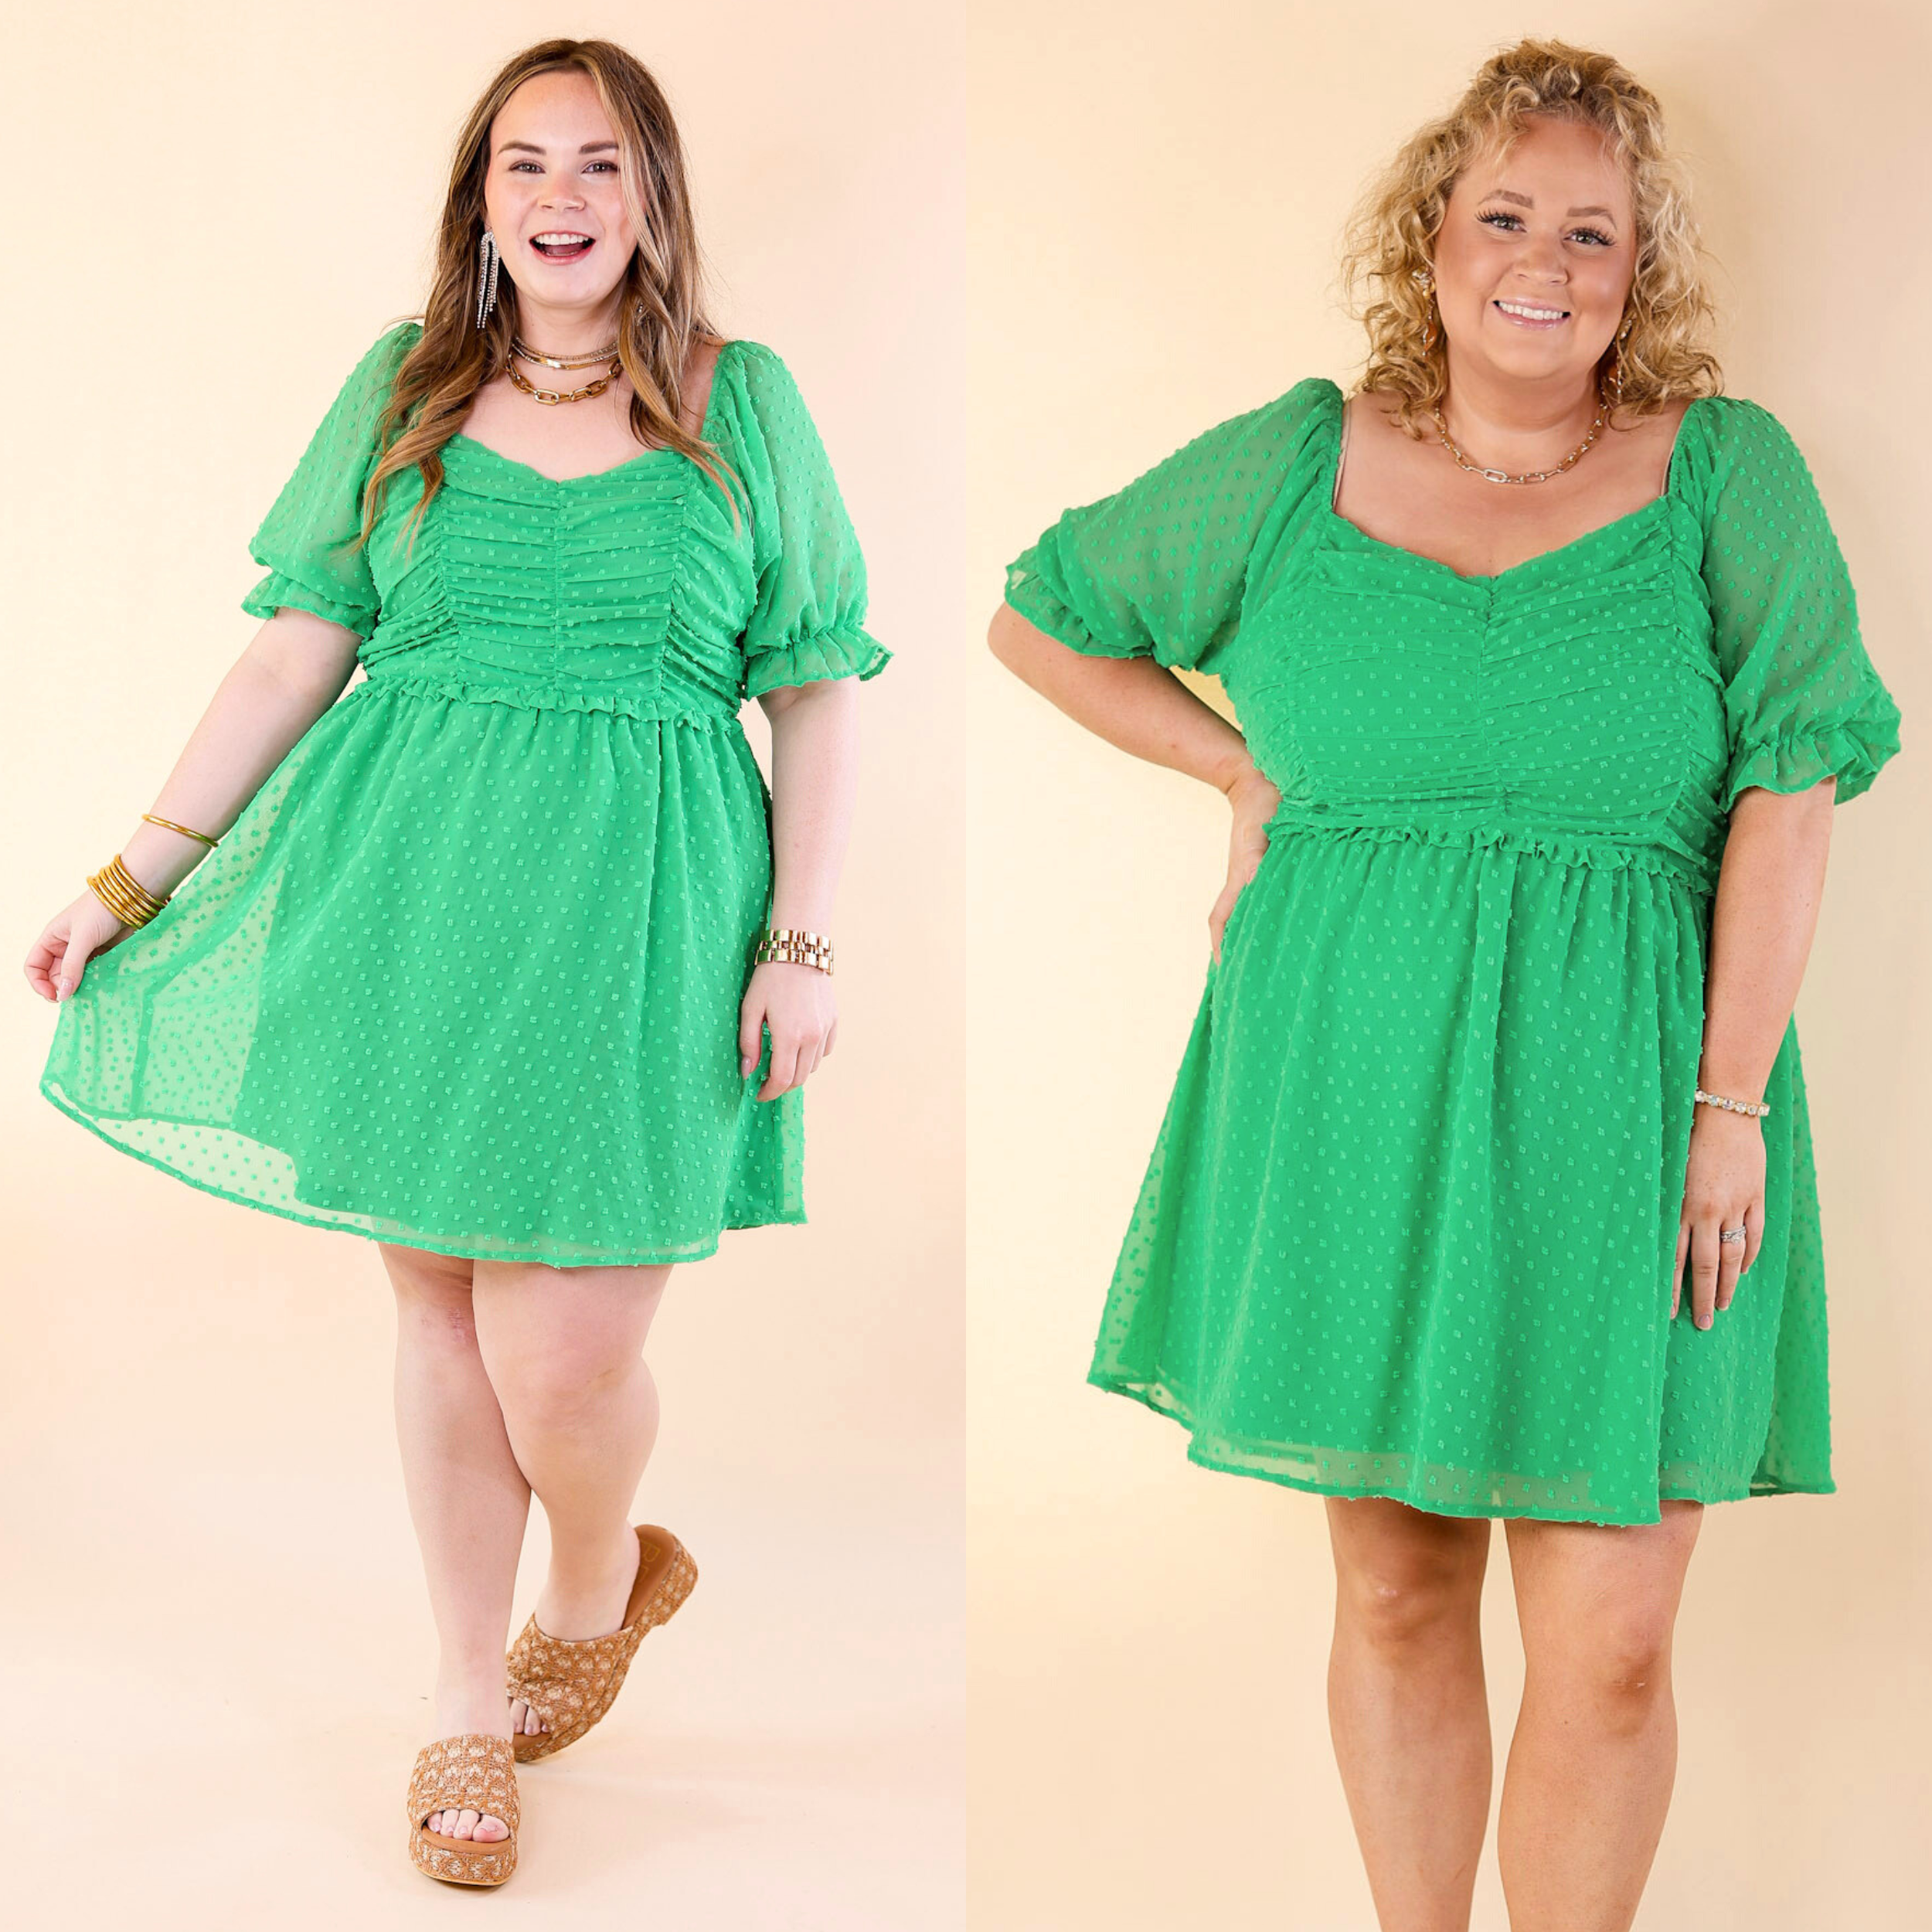 Favorite Adventure Swiss Dot Dress with Short Balloon Sleeves in Green - Giddy Up Glamour Boutique